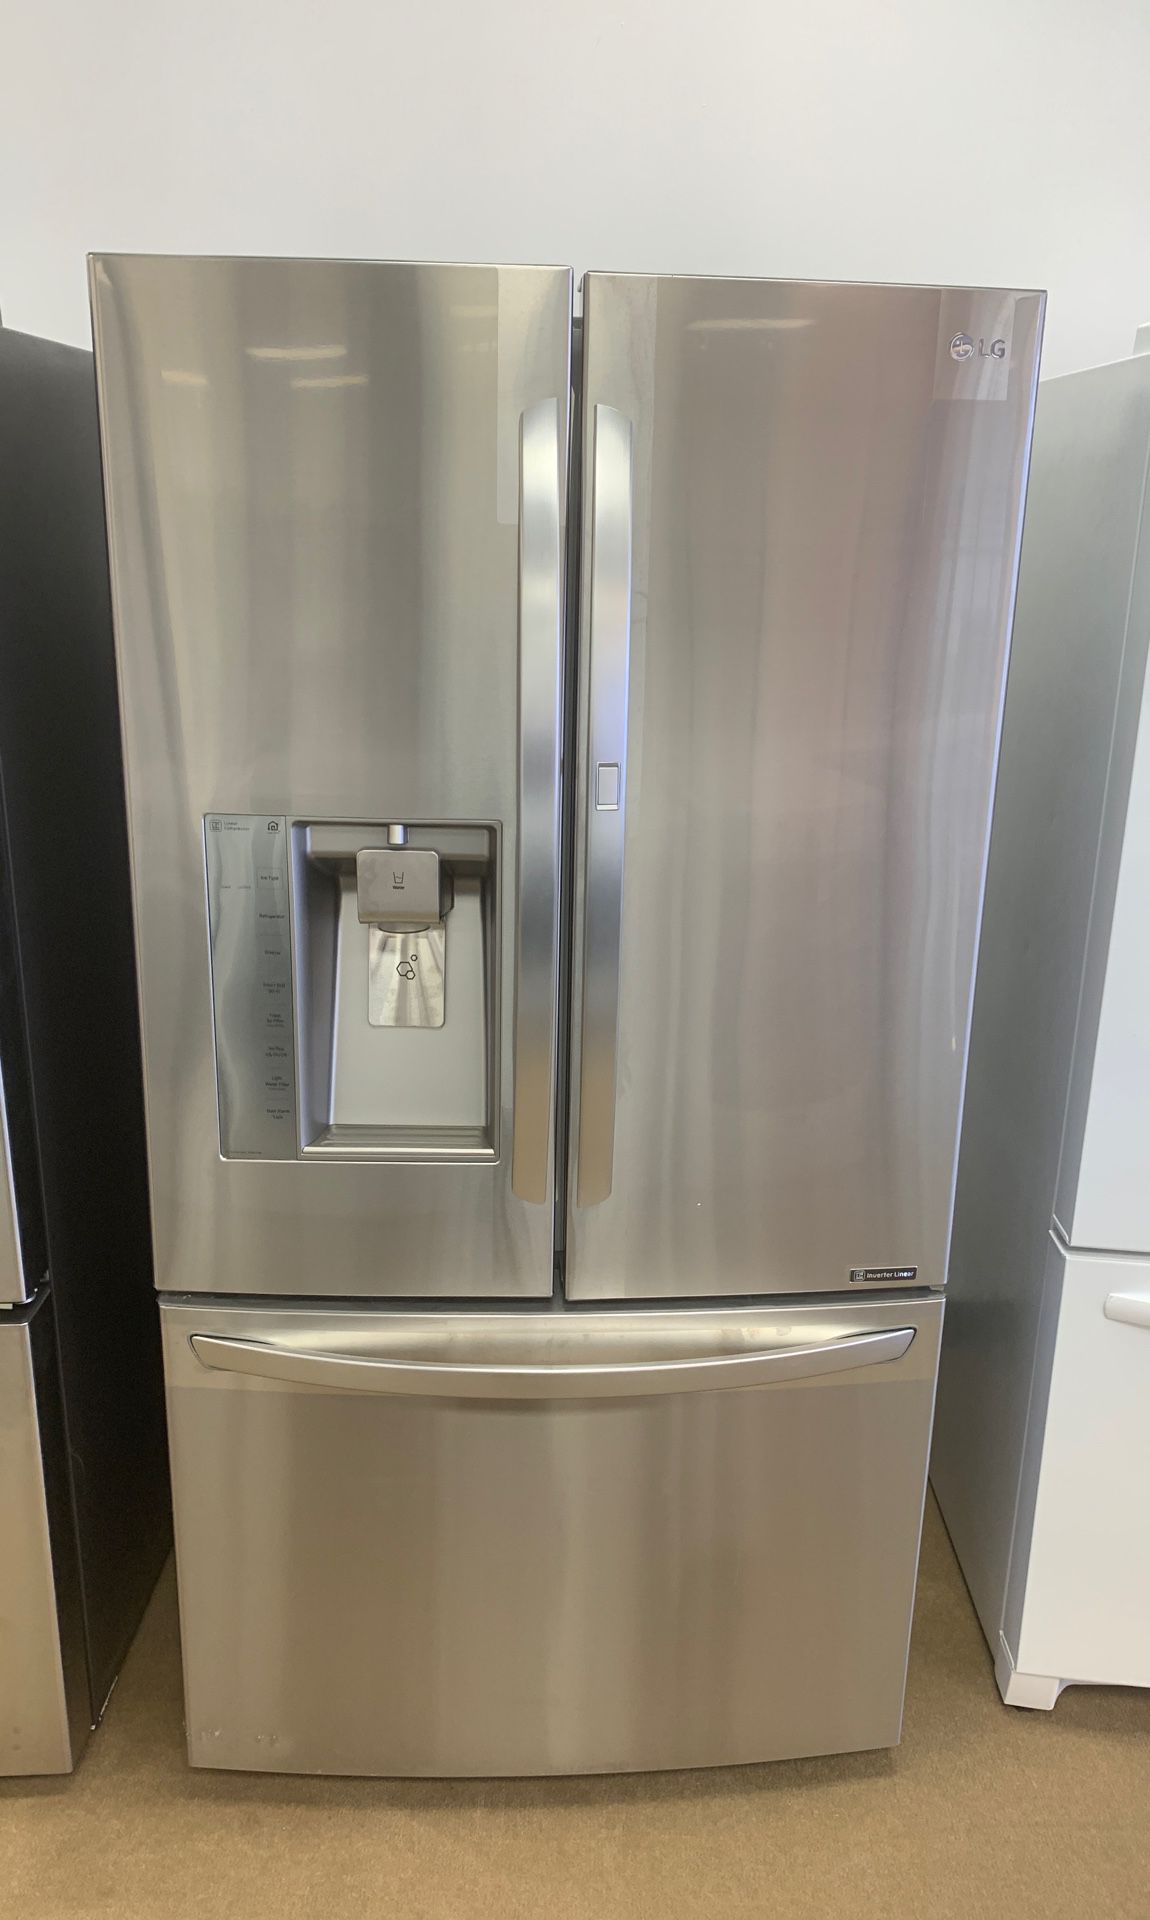 LG Refrigerator New Dent and Scratch for Sale in Indianapolis, IN - OfferUp